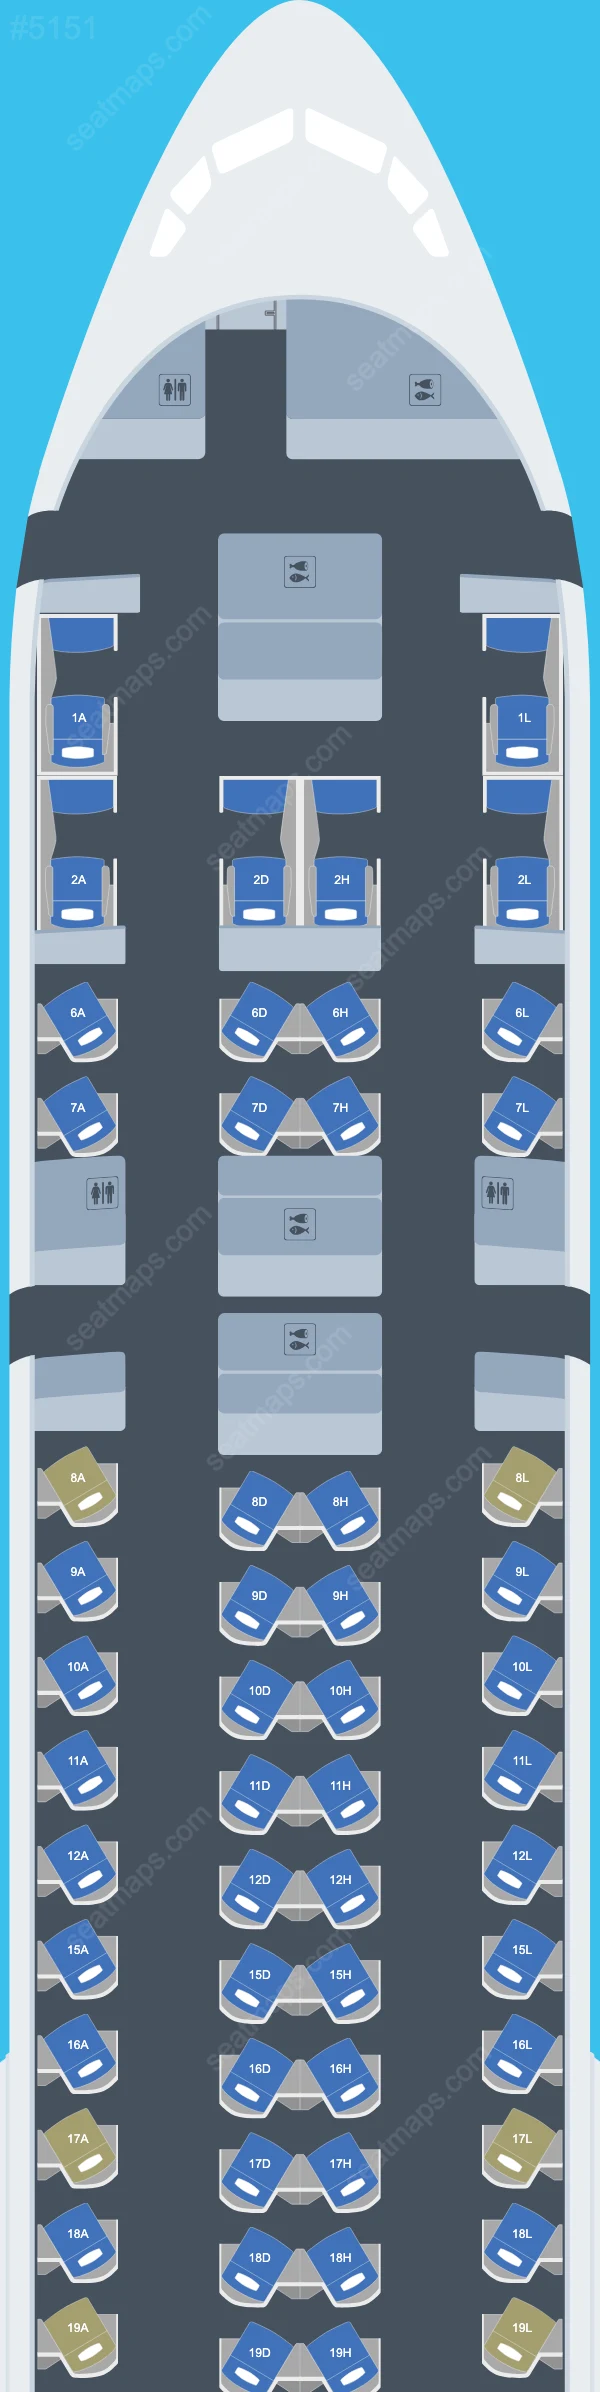 China Eastern Boeing 777-300 ER seatmap preview